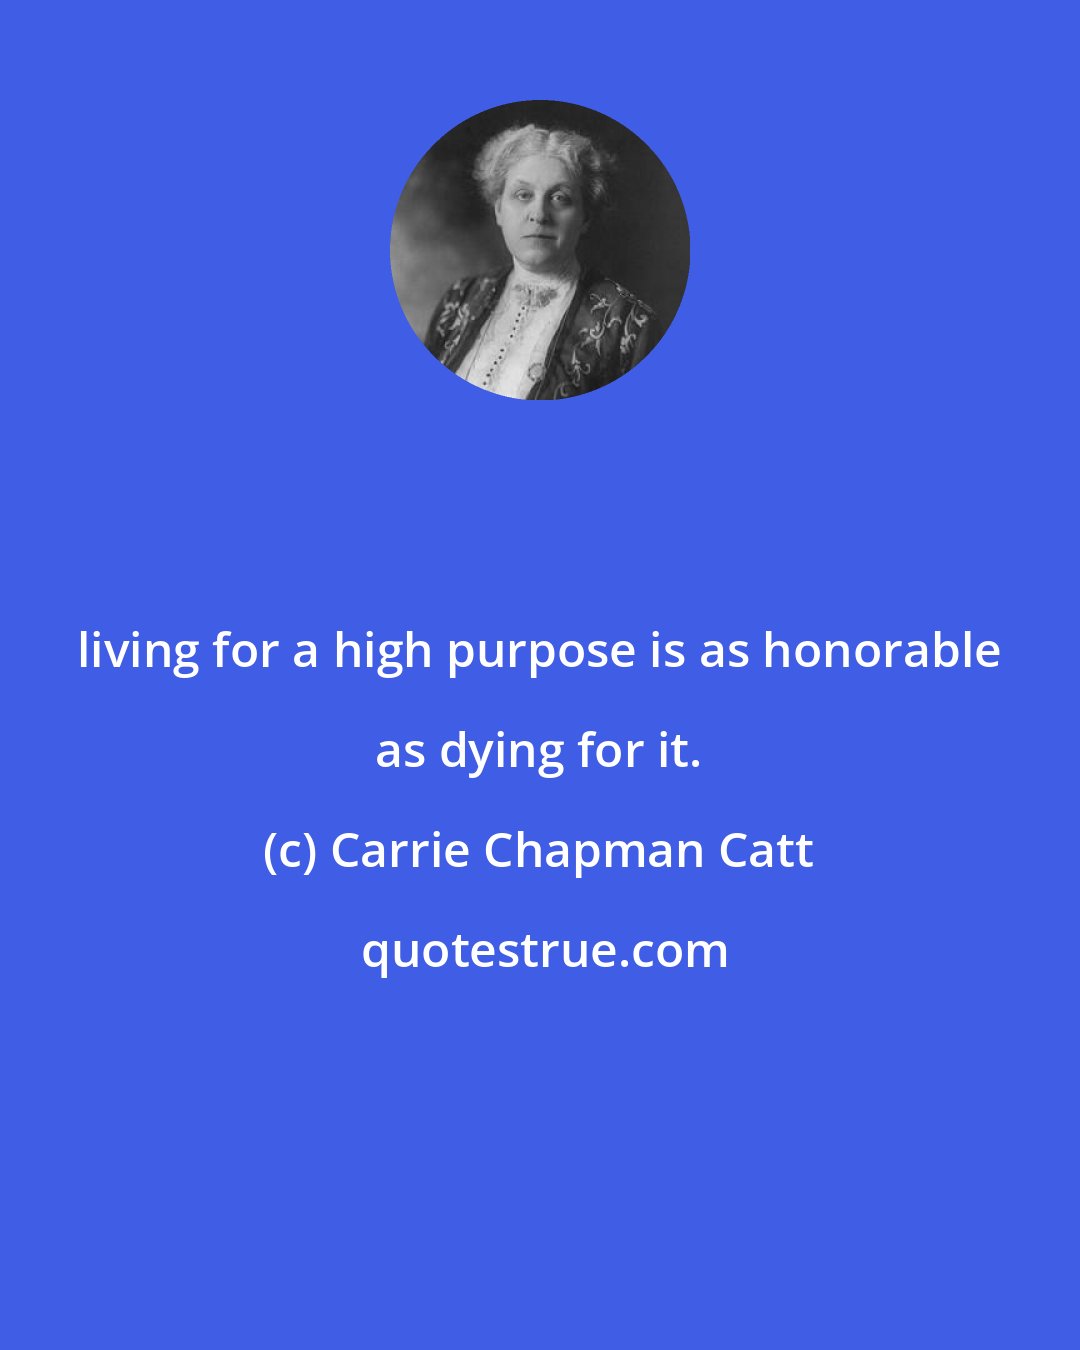 Carrie Chapman Catt: living for a high purpose is as honorable as dying for it.